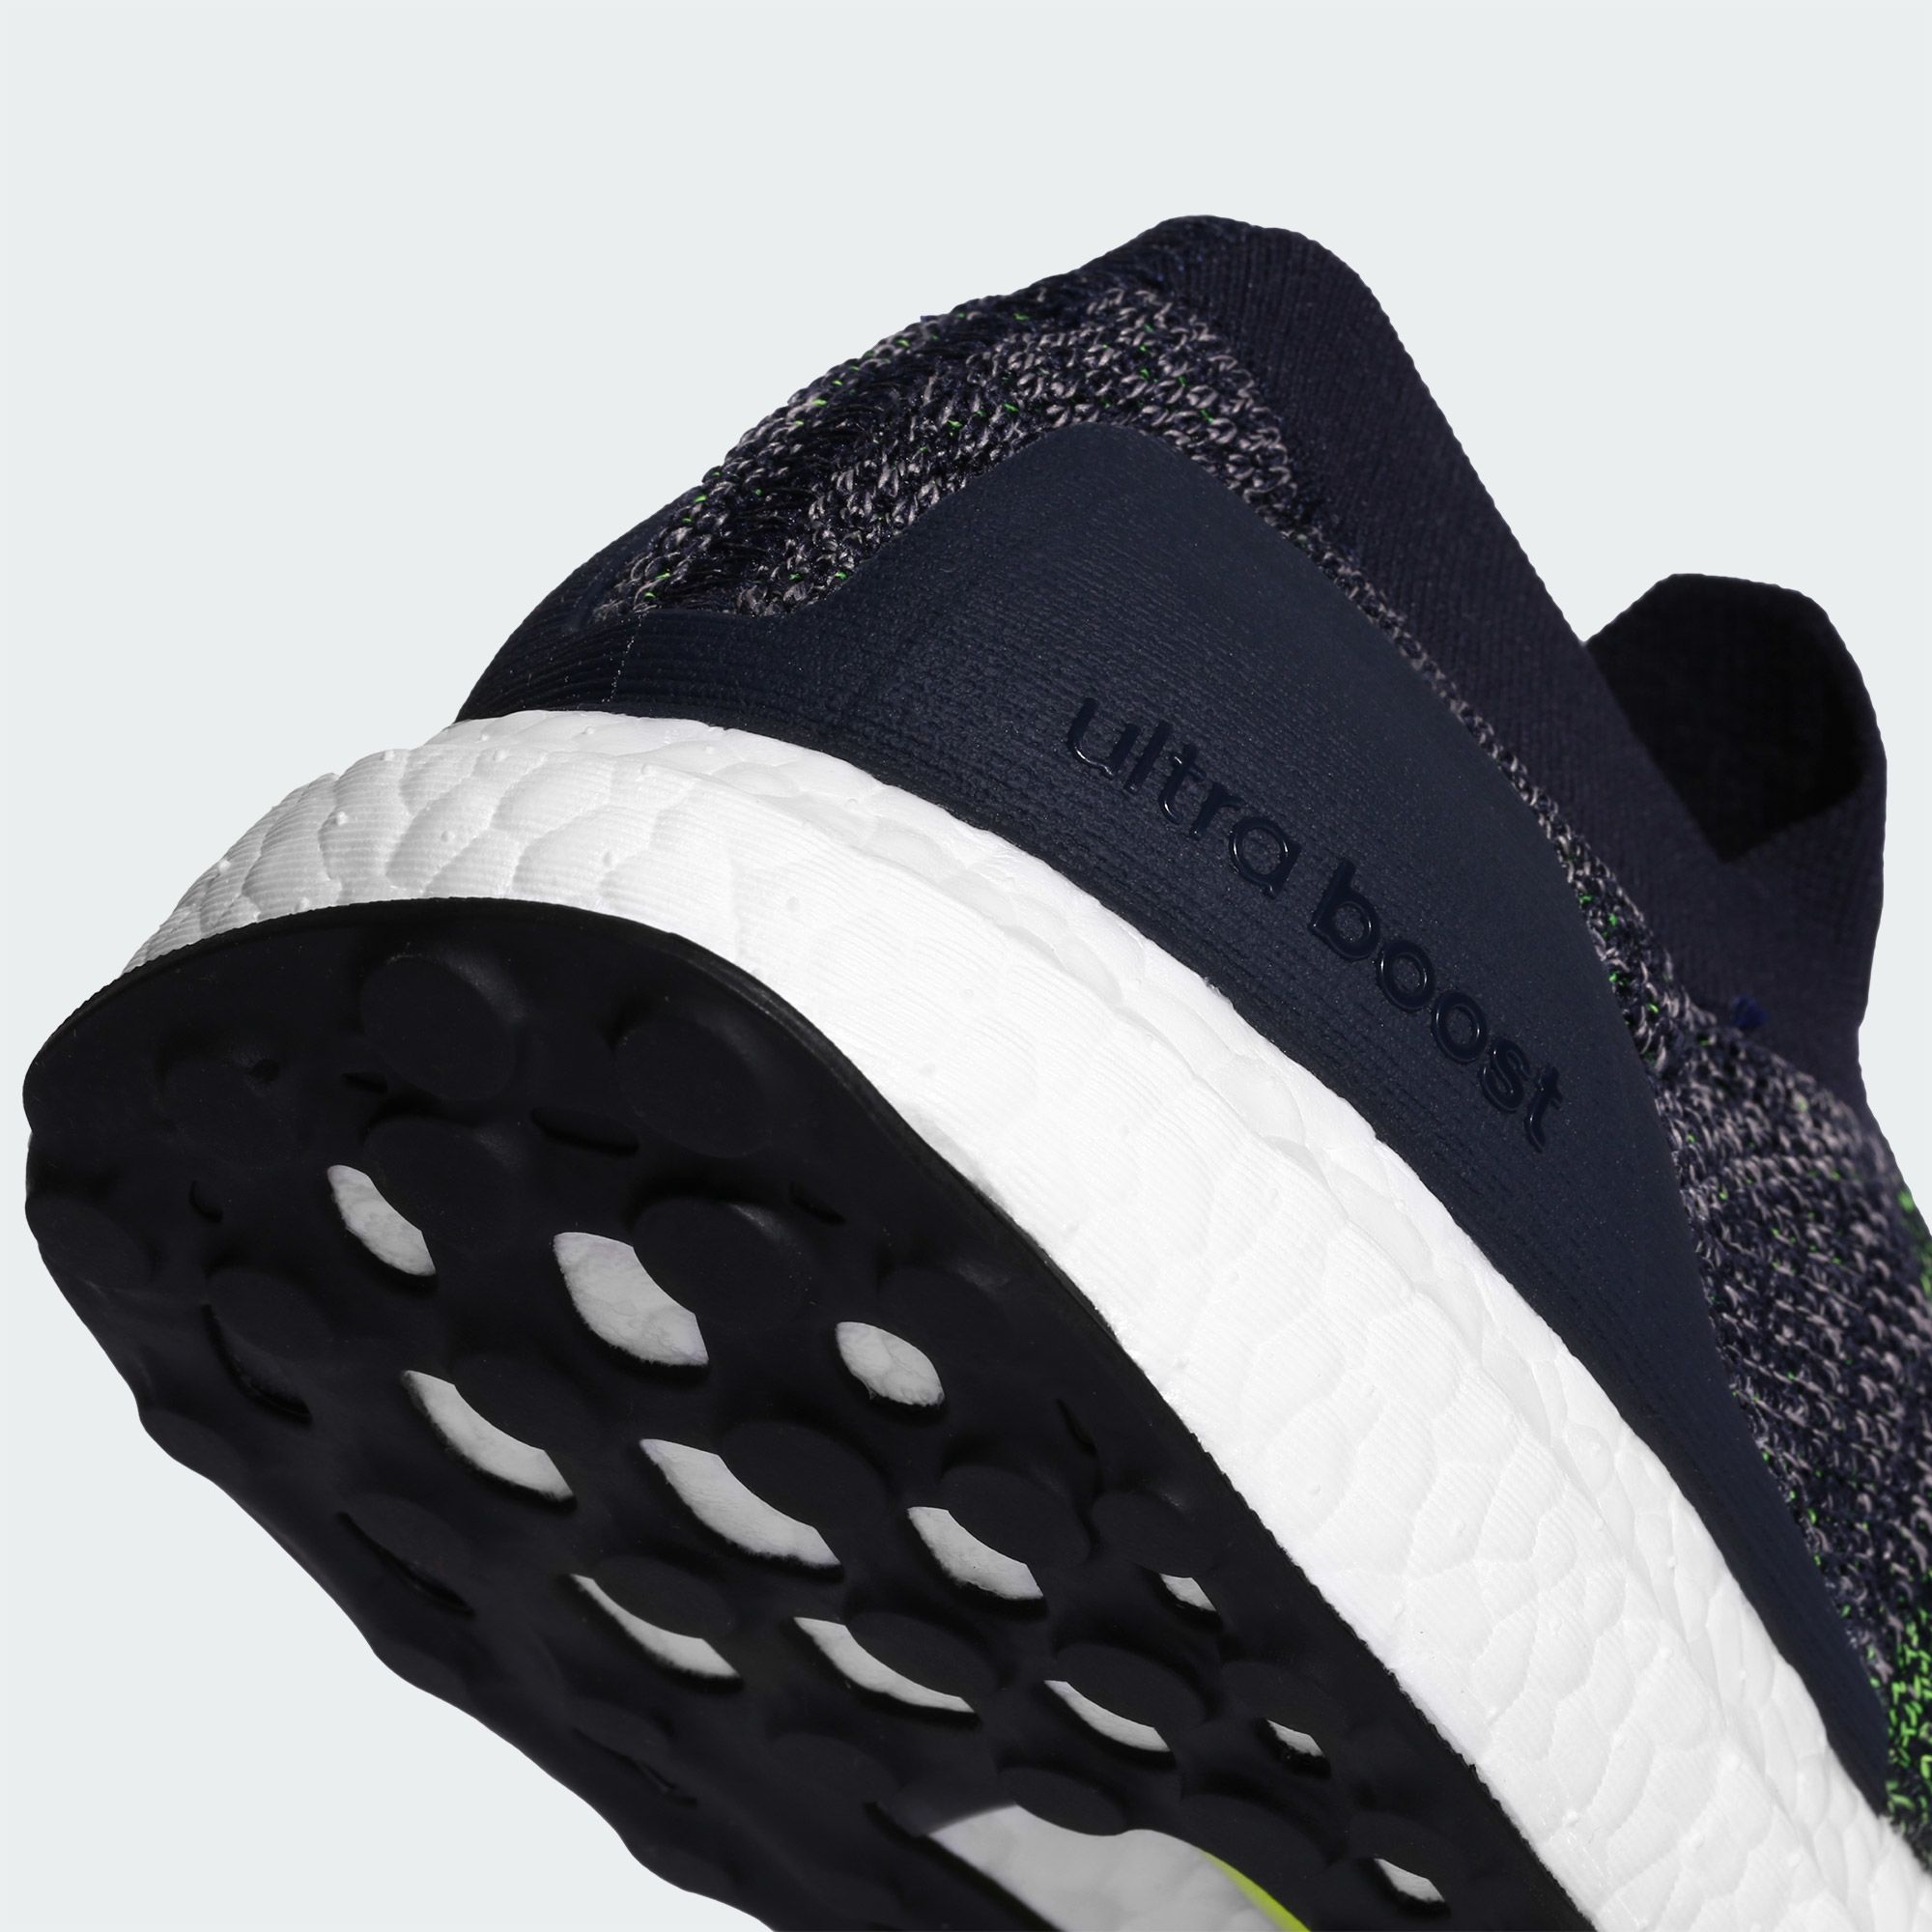 adidas-ultra-boost-laceless-legend-ink-green-8